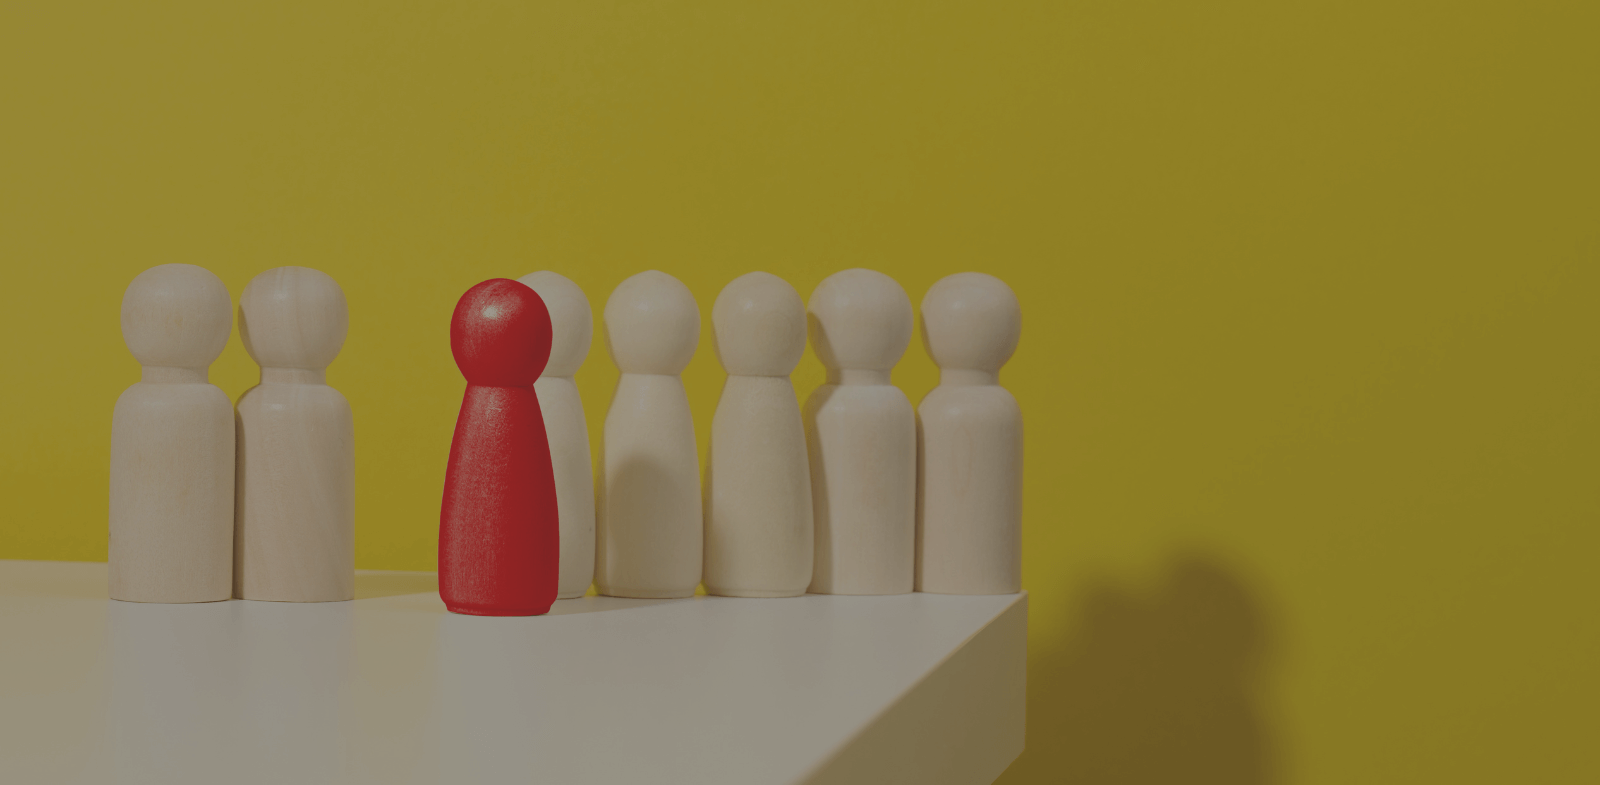 red wooden figure standing out from plain wooden figures on yellow background